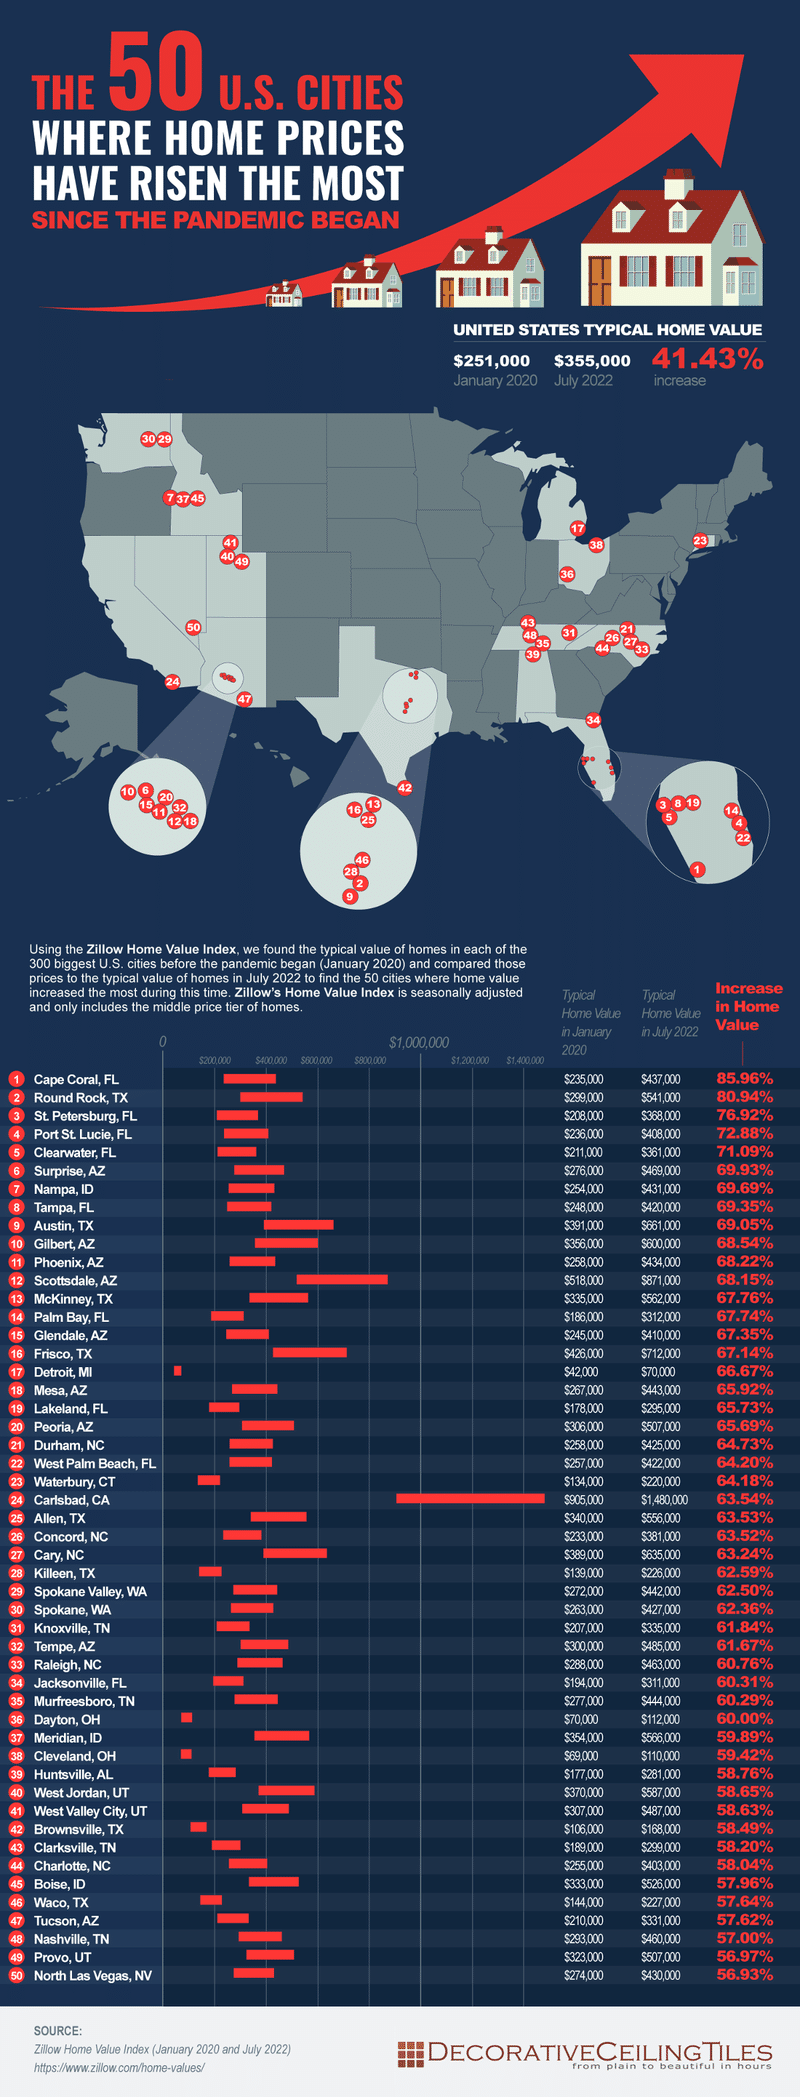 The 50 U.S. Cities where home prices have risen the most since the Pandemic started: United States typical home value has 41.43% increased